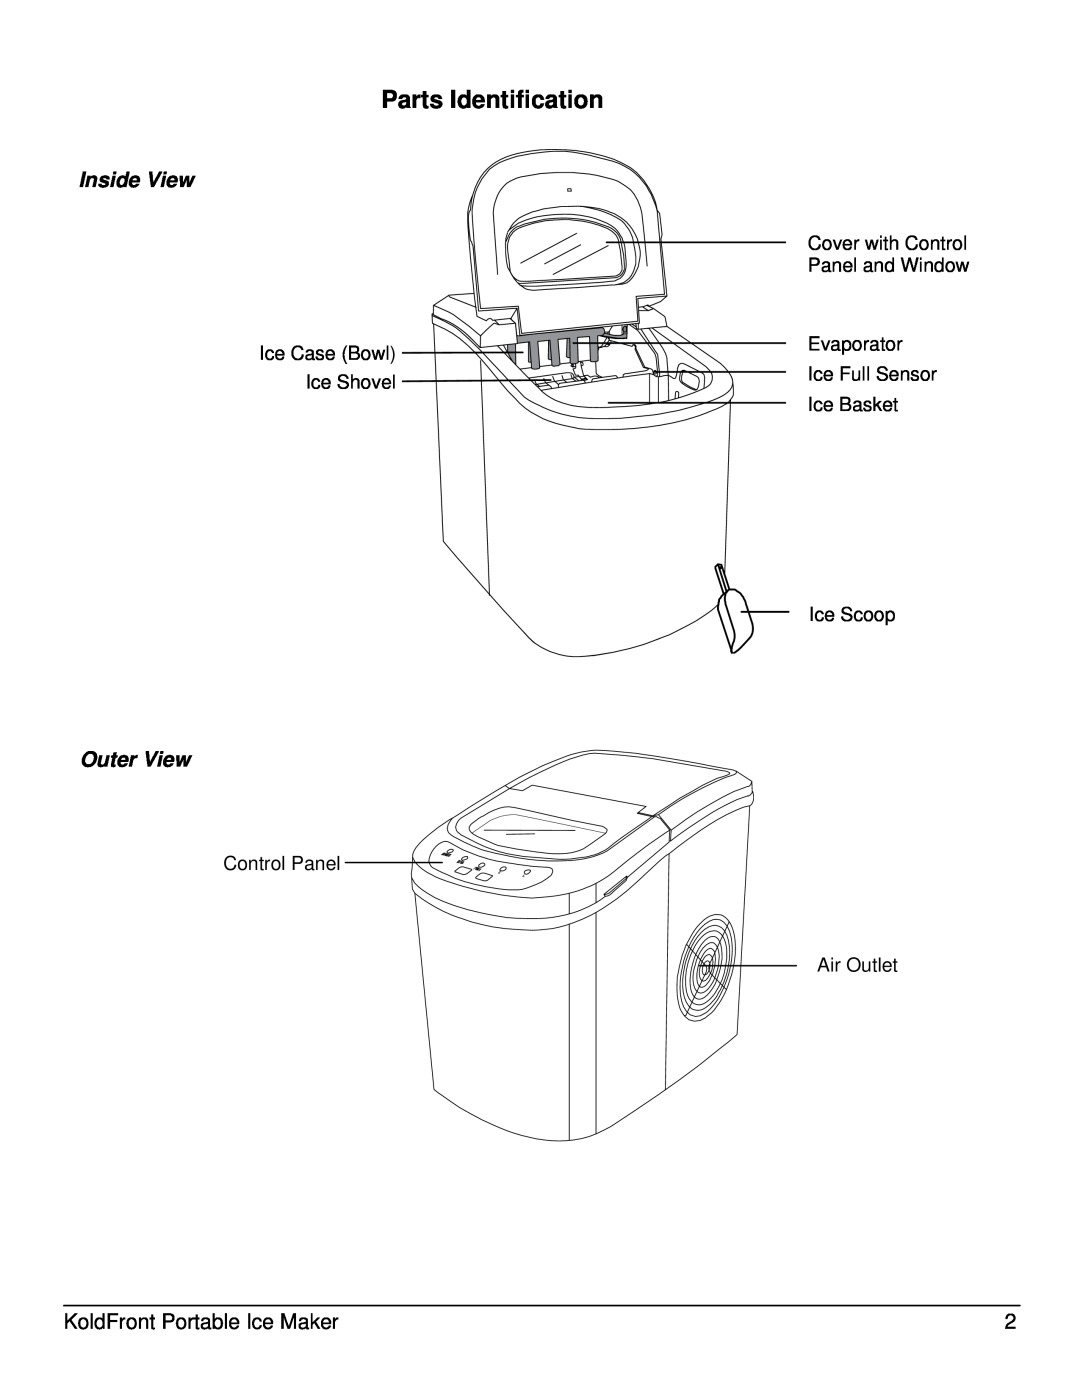 KoldFront KIM202W owner manual Parts Identification, Inside View, Outer View, Ice Case Bowl 